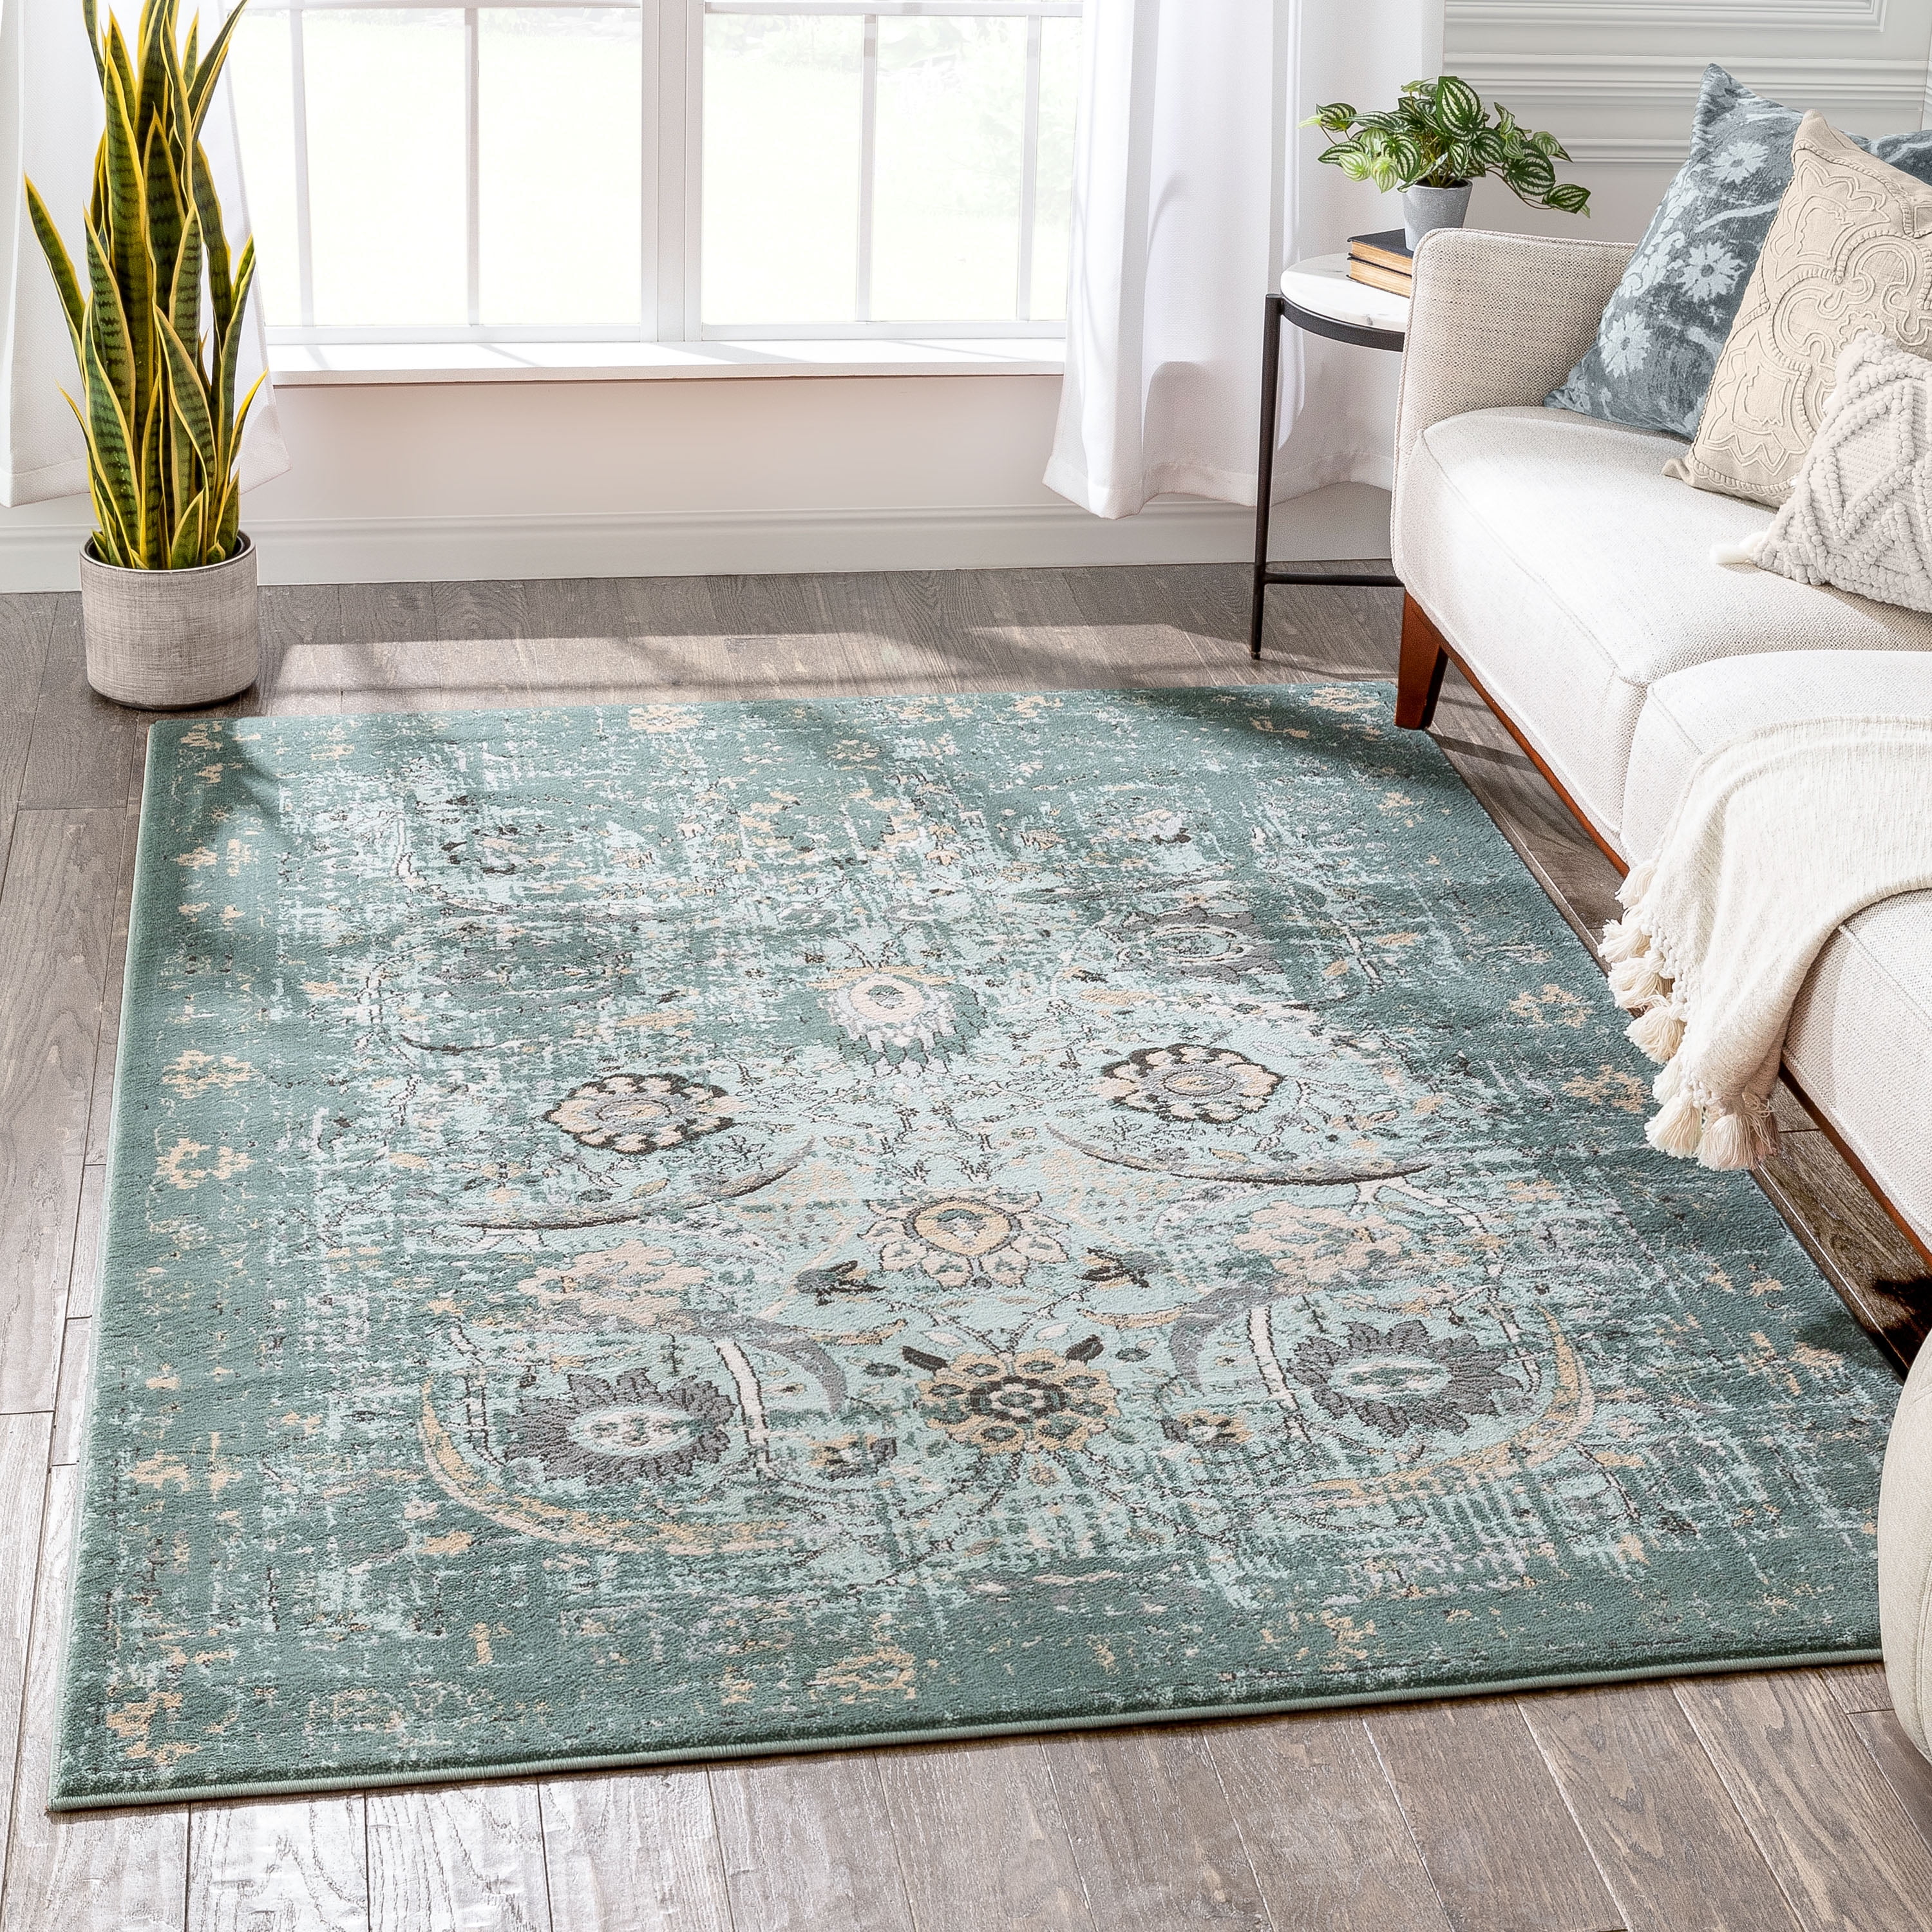 Area Rugs Traditional Turkish Style Carpet Flooring Runner Mat All Sizes 